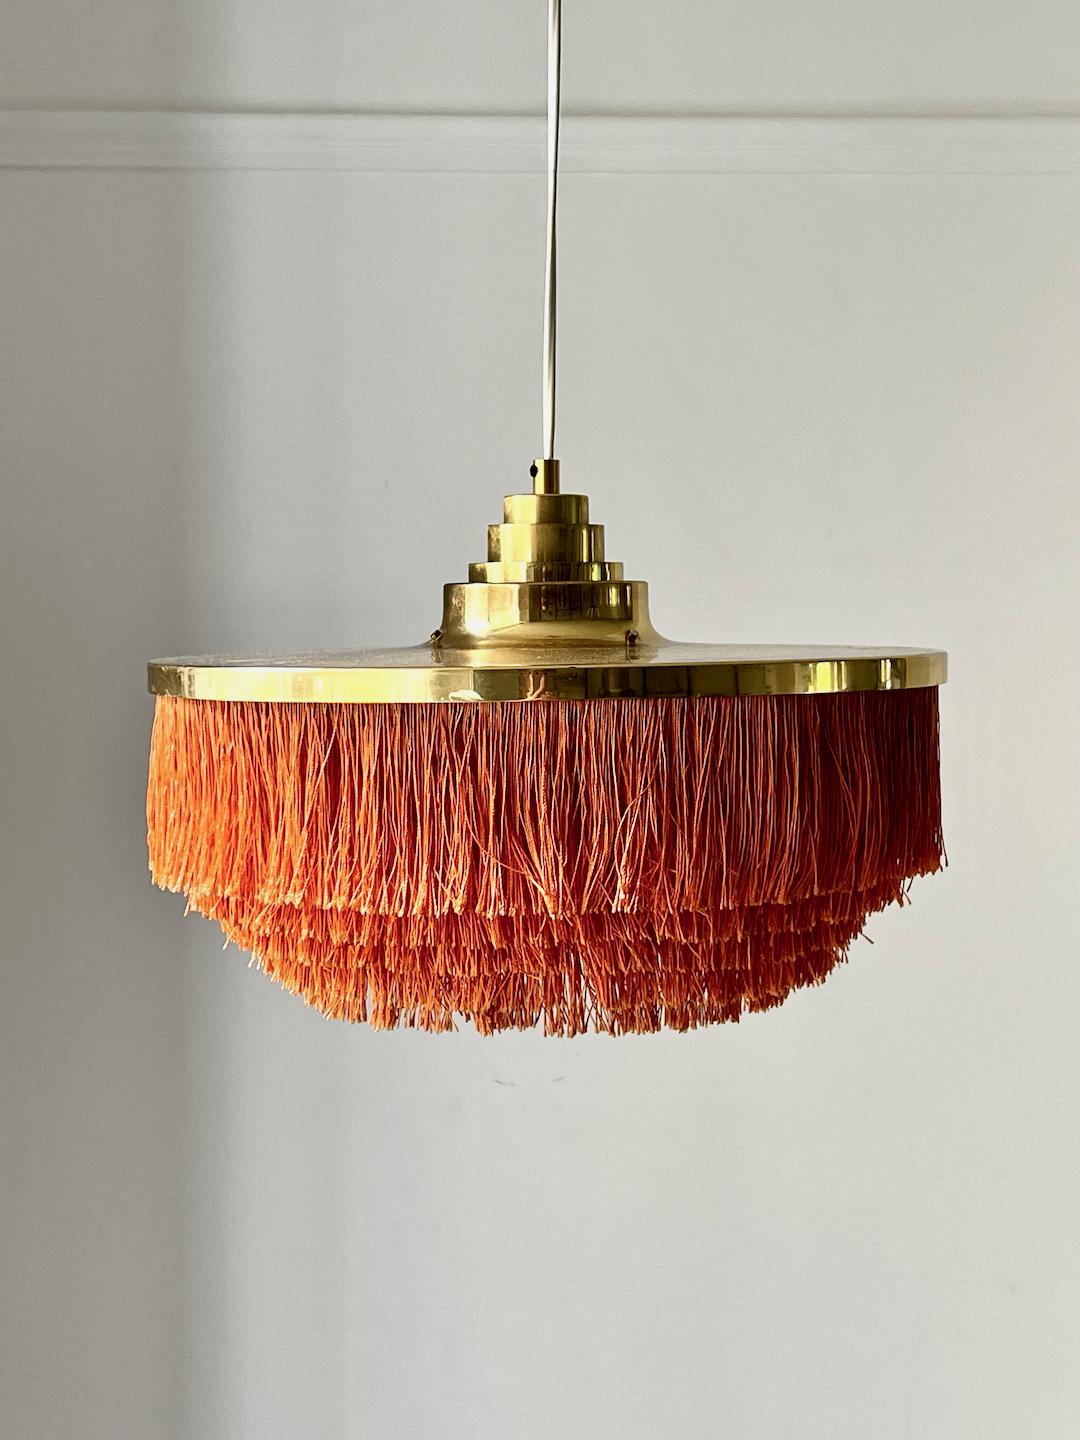 Pendant light by the Swedish designer Hans Agne Jakobsson for his own company in Markaryd. A very nice piece of Scandinavian modern design with aged patina. Labelled.

Large brass canopy with stepped detail and layered fringes in orange silk. Brass